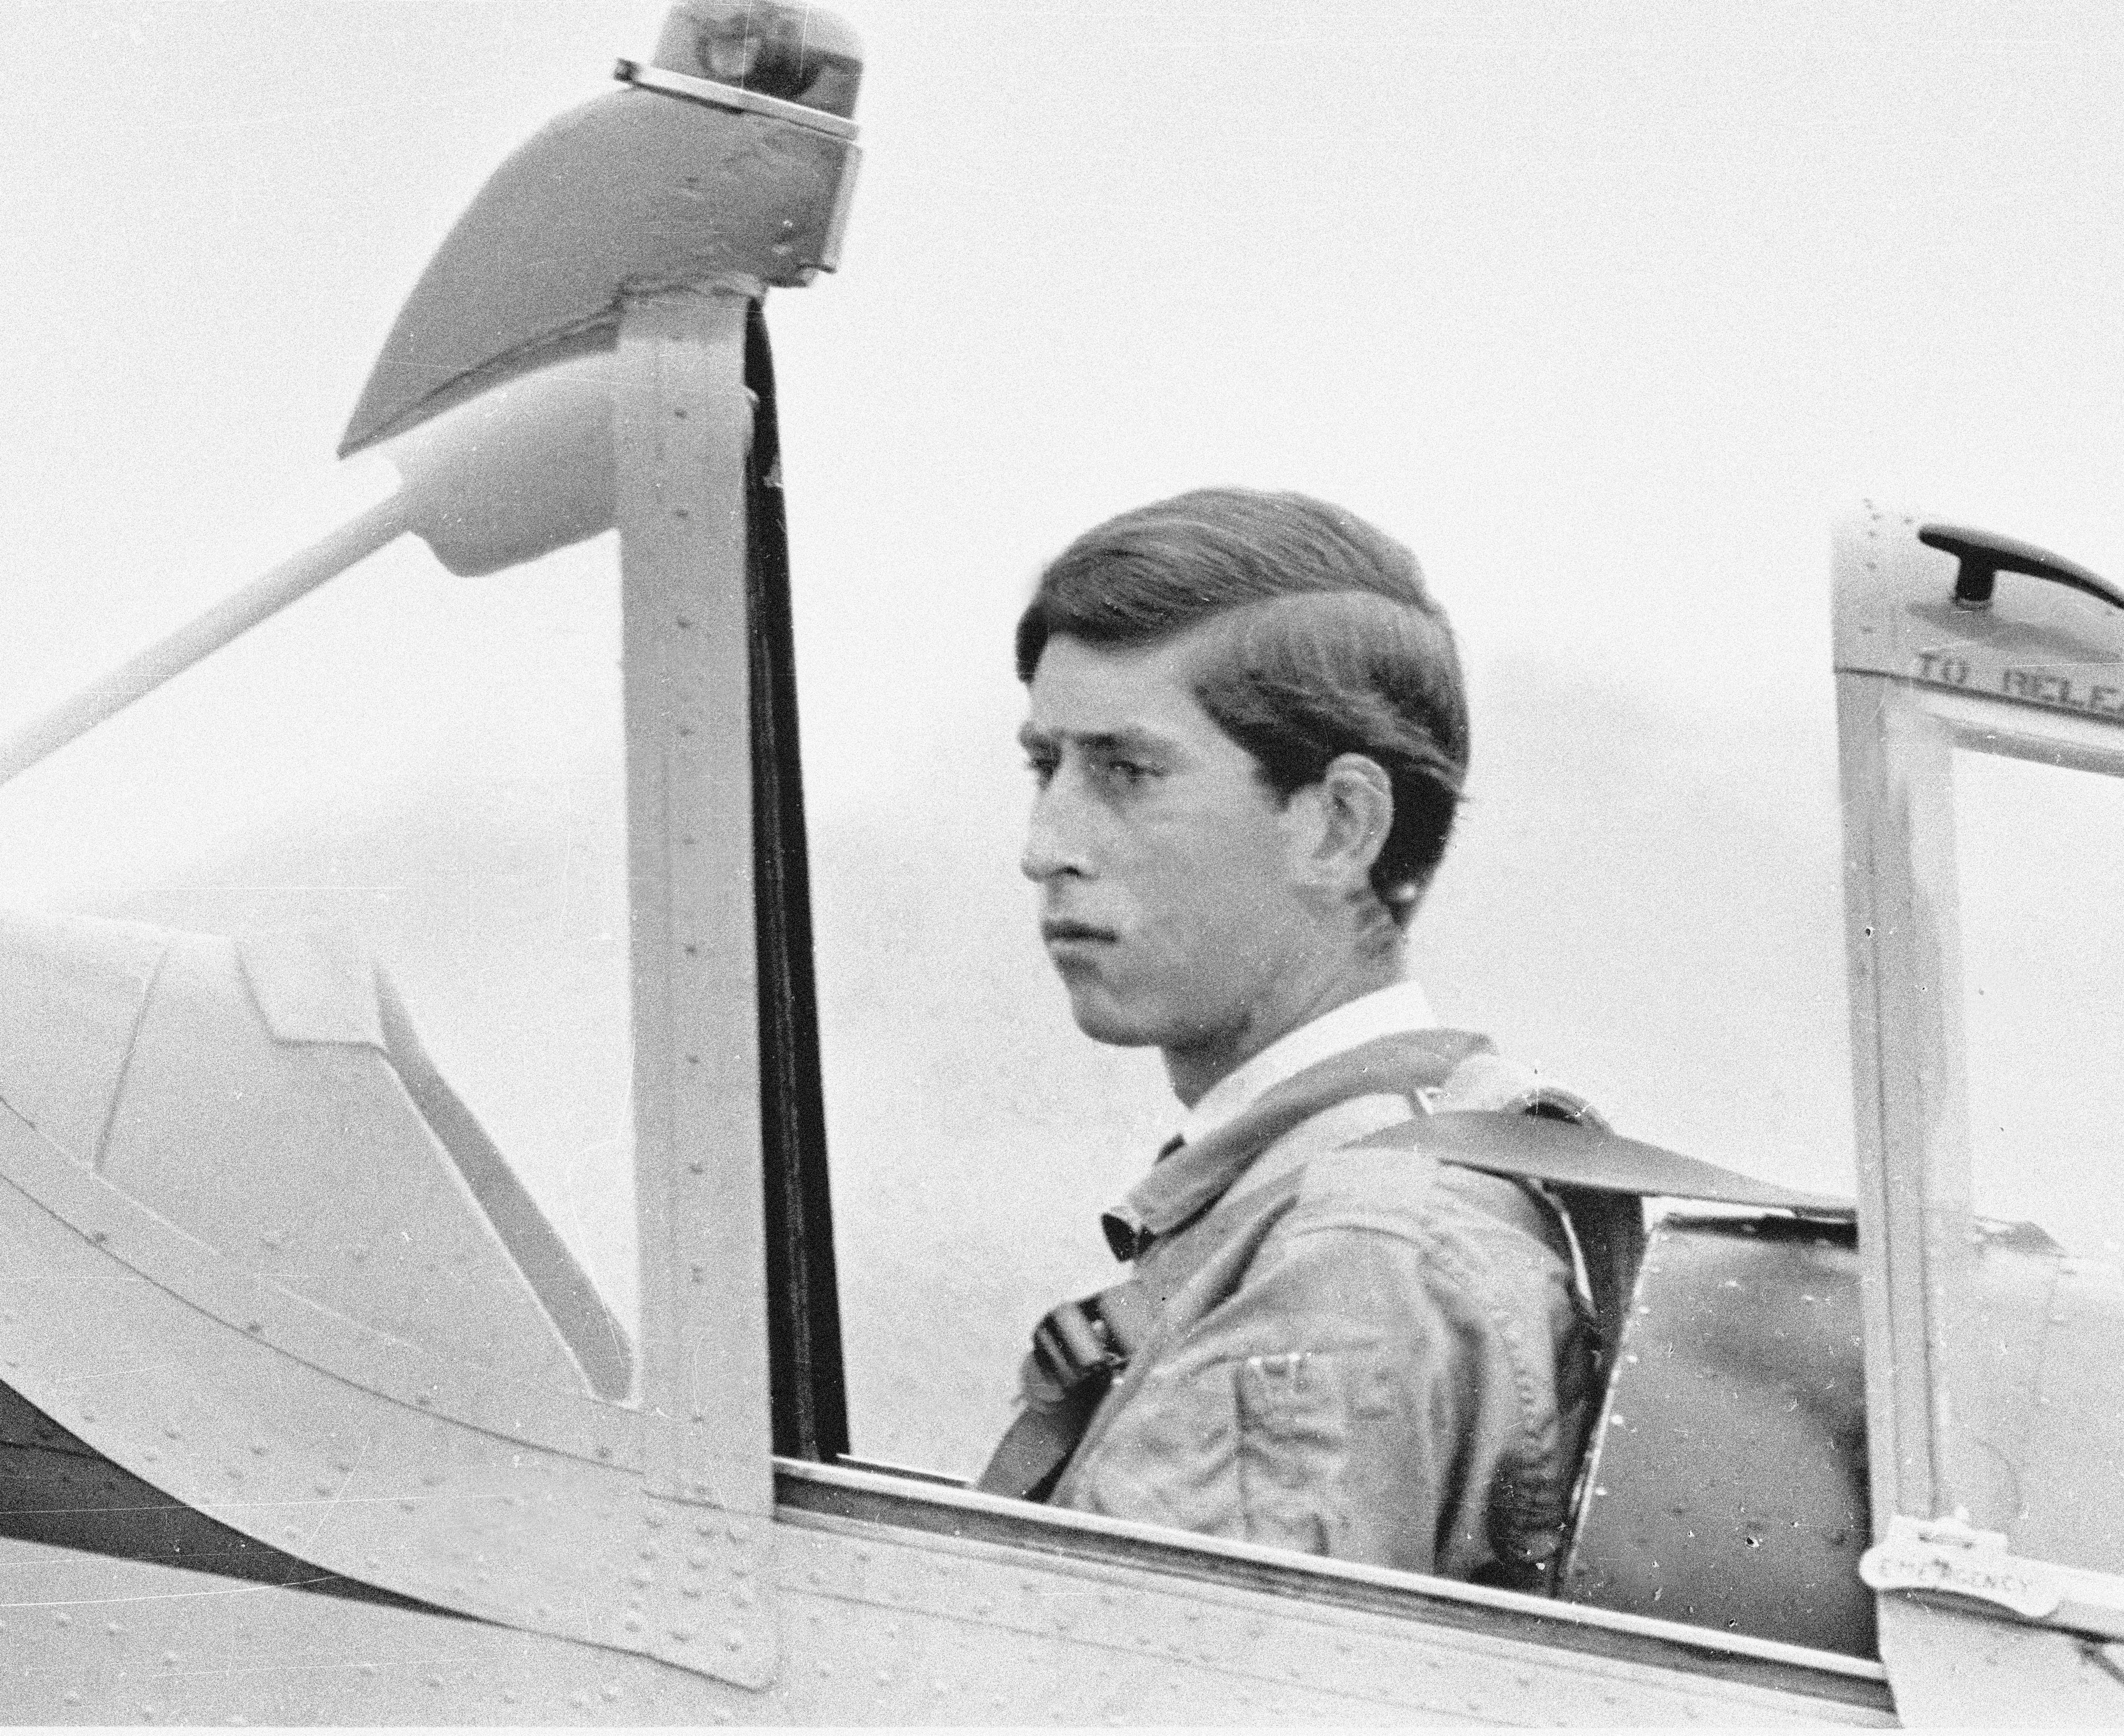 Prince Charles learning to fly at RAF Tangmere in August 1968 in a de Havilland Chipmunk a single engined two seater trainer in 1969